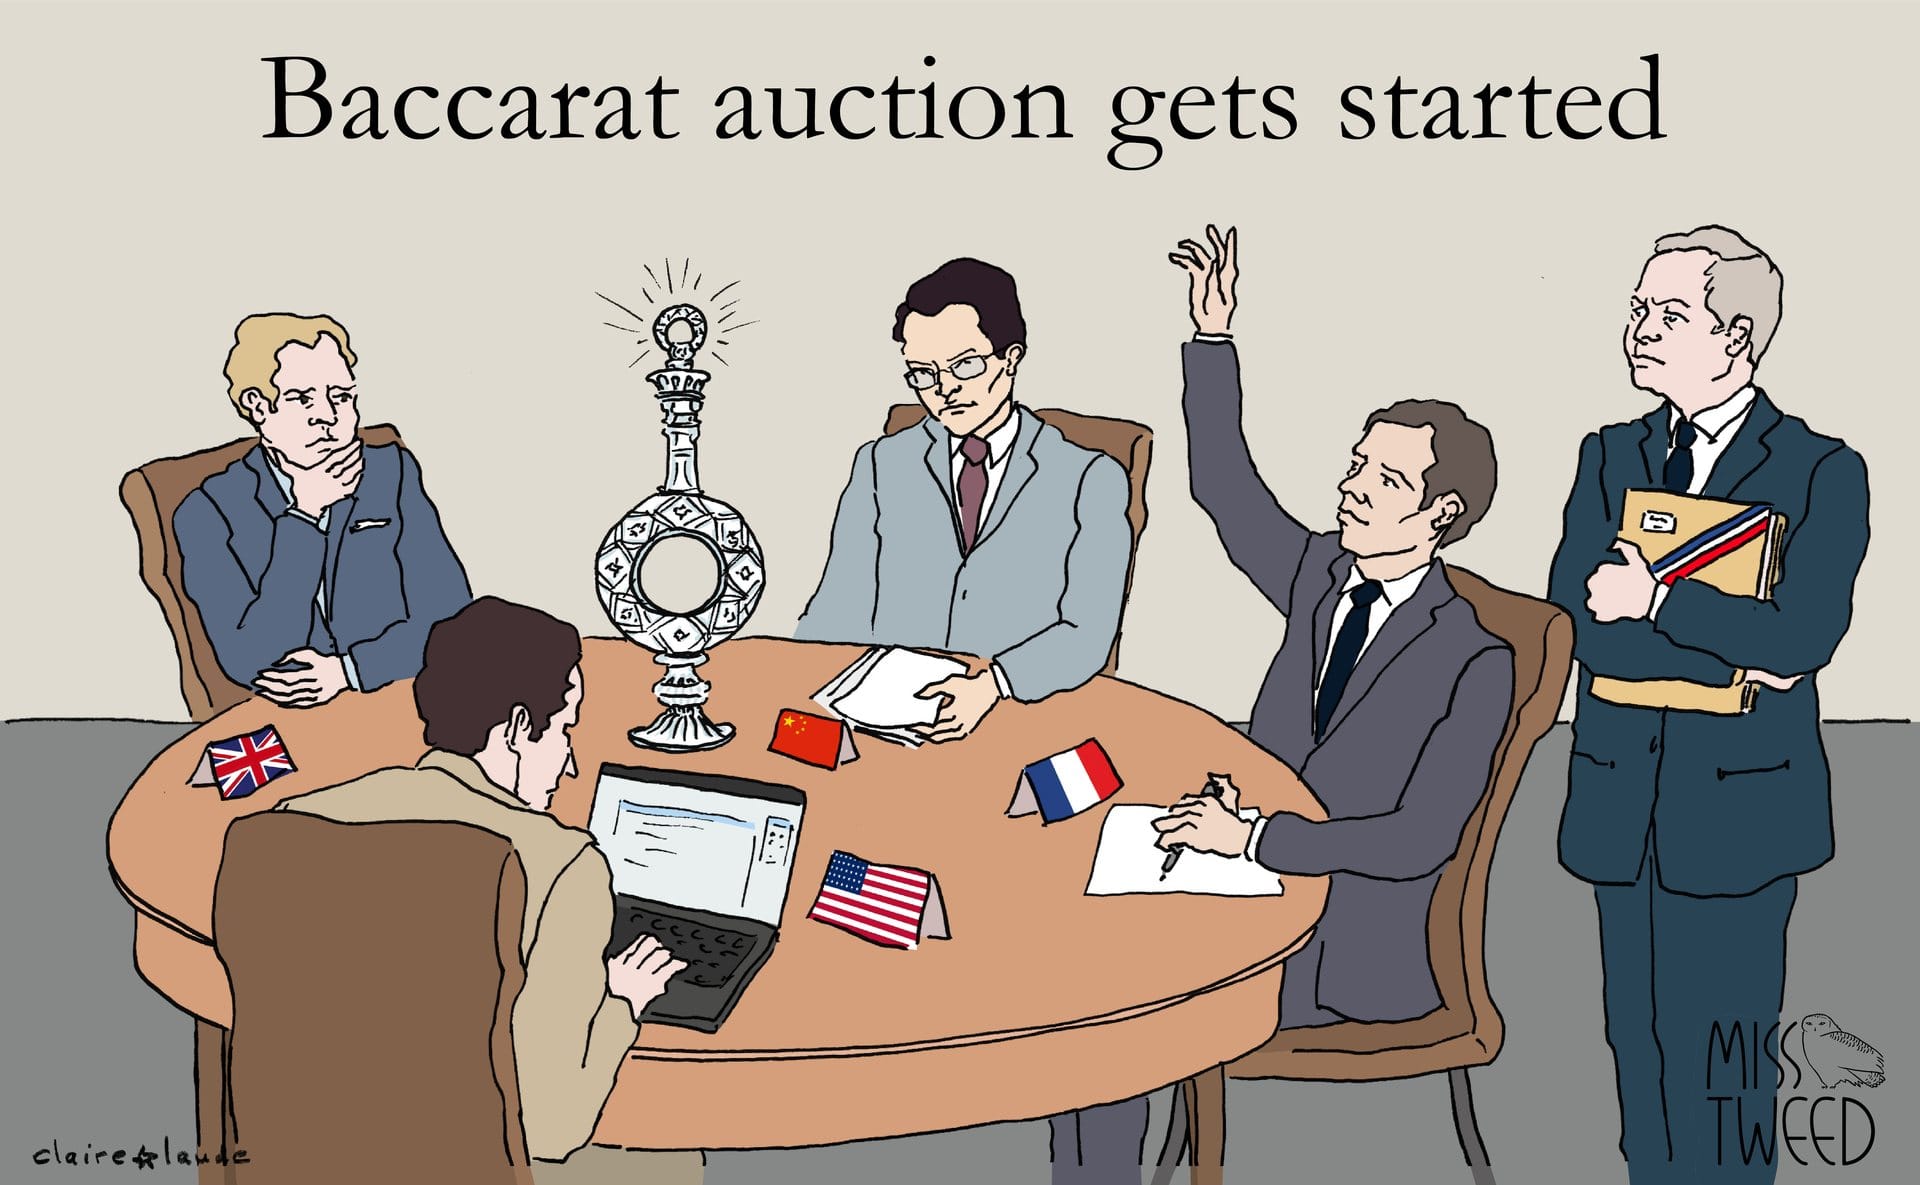 Baccarat buyers jockey for positioning. Sale process starts in April